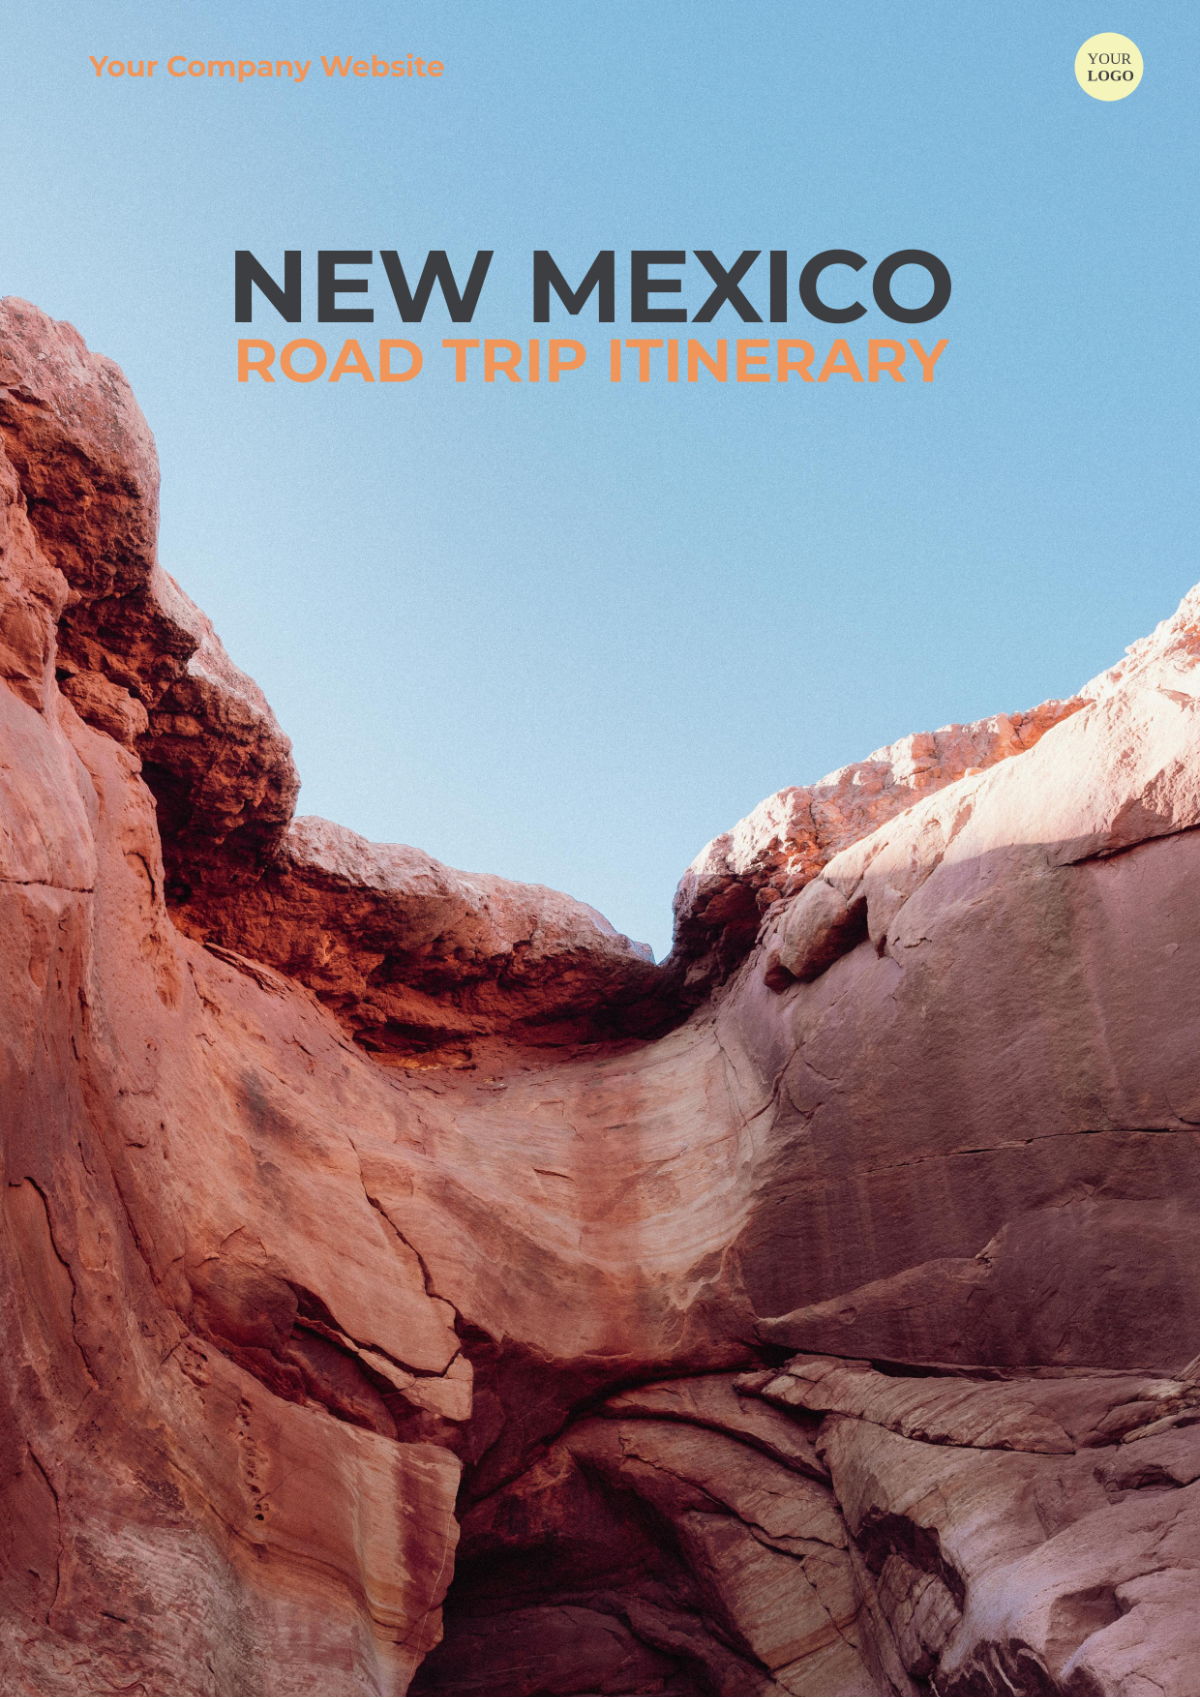 New Mexico Road Trip Itinerary Template